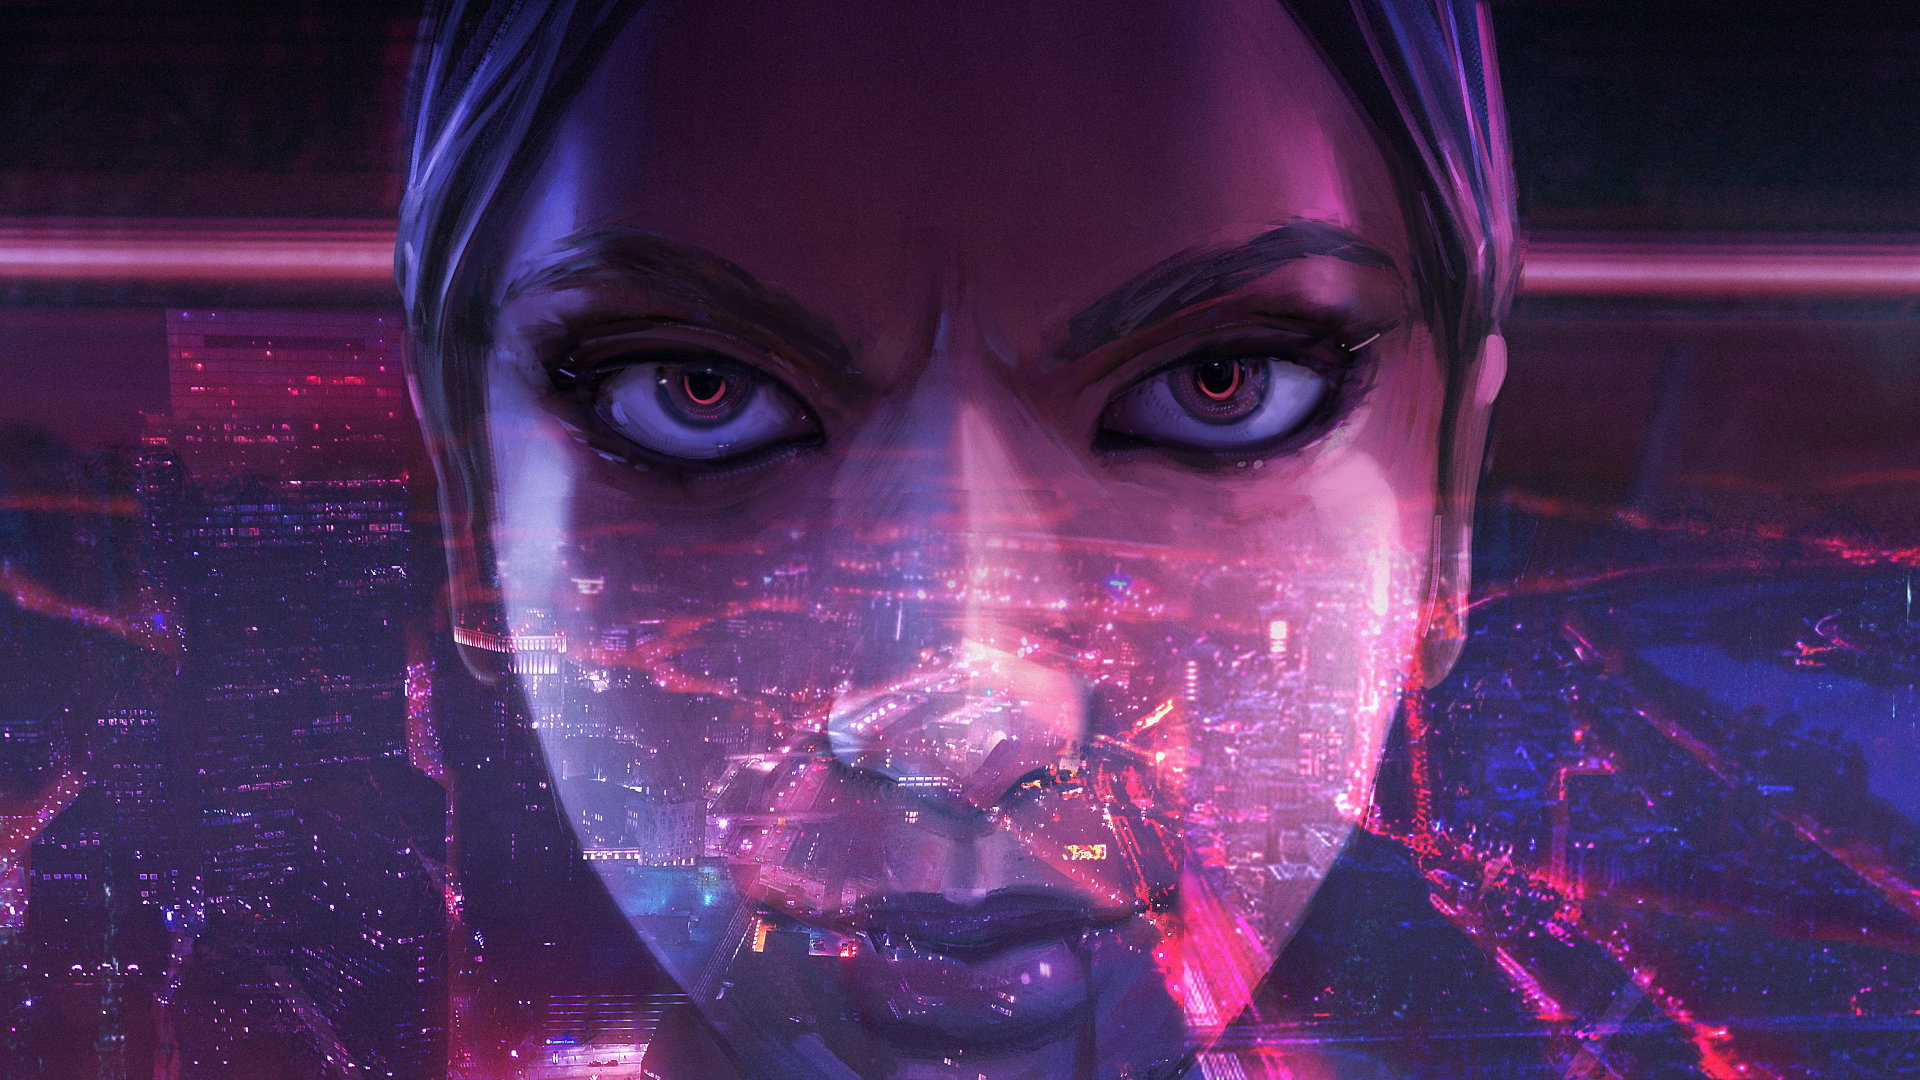 Vampire The Masquerade Swansong Artwork of a woman's determined face overlaid on a neon-lit city downtown at night.